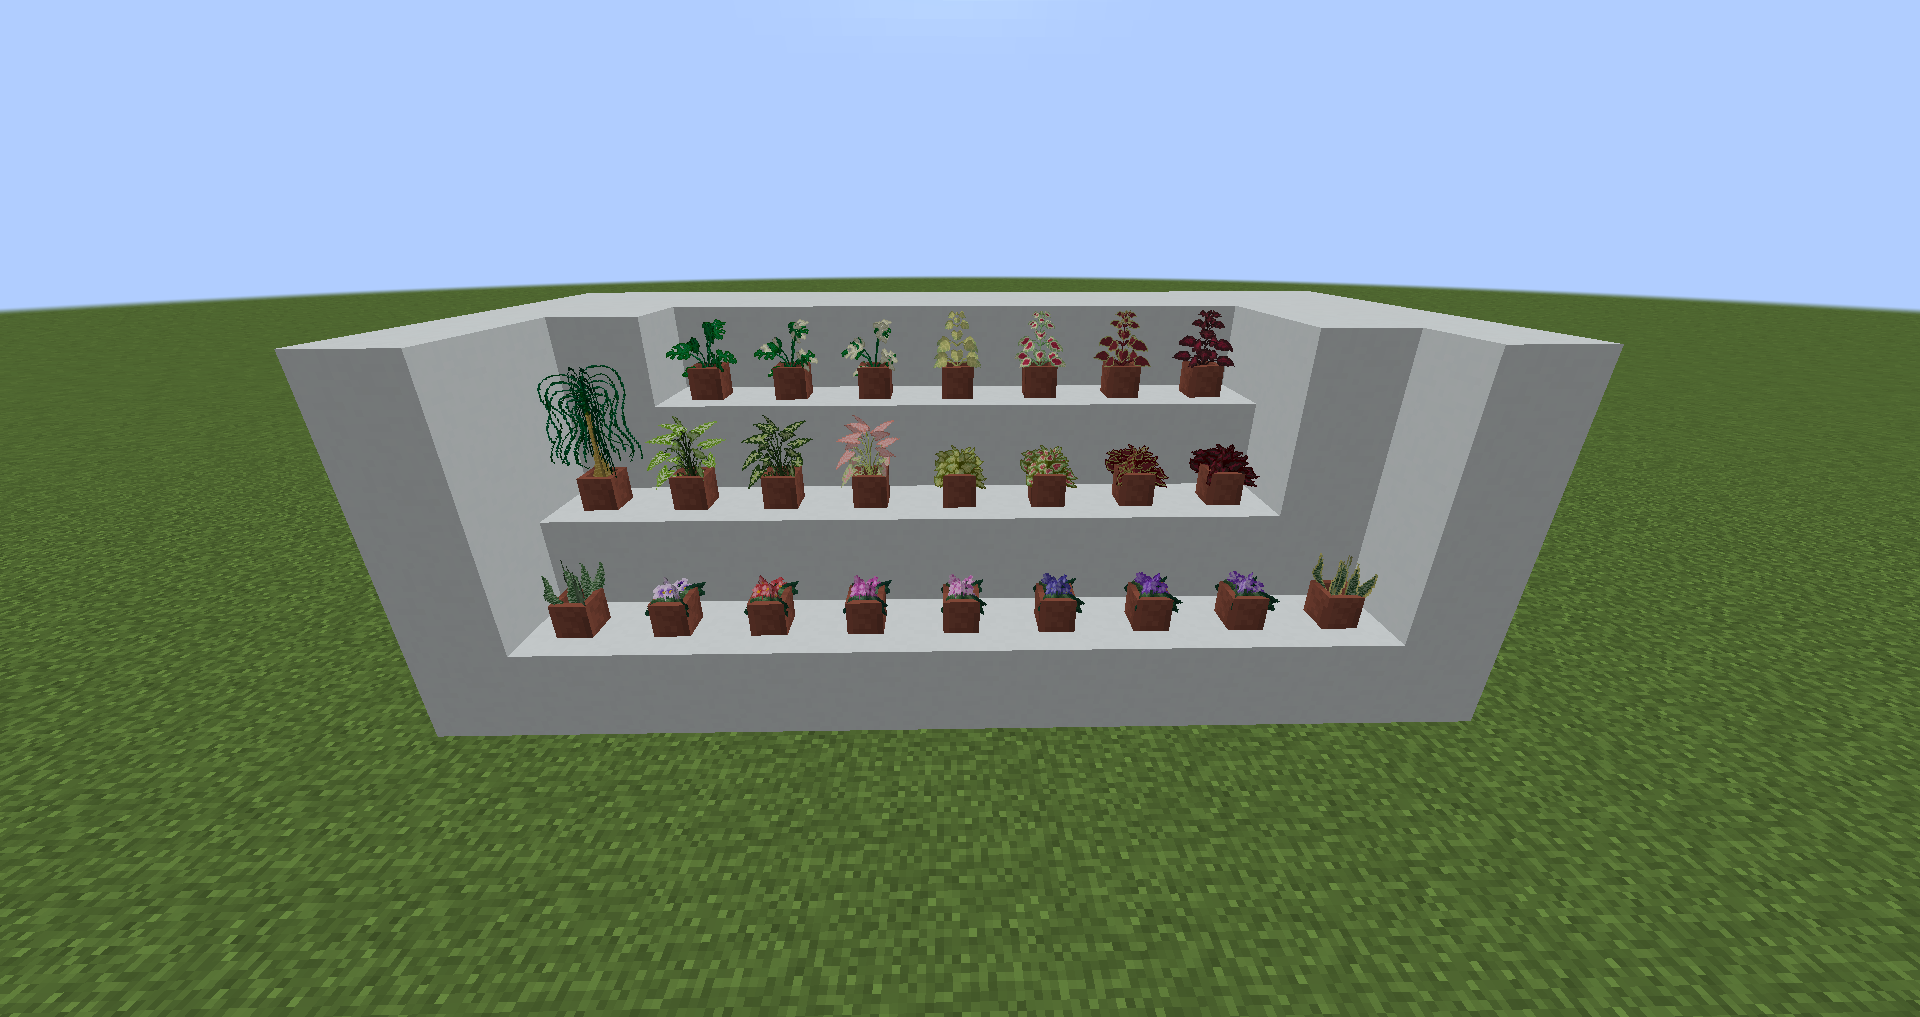 All the new plants in pots (as of version 1.0.0)